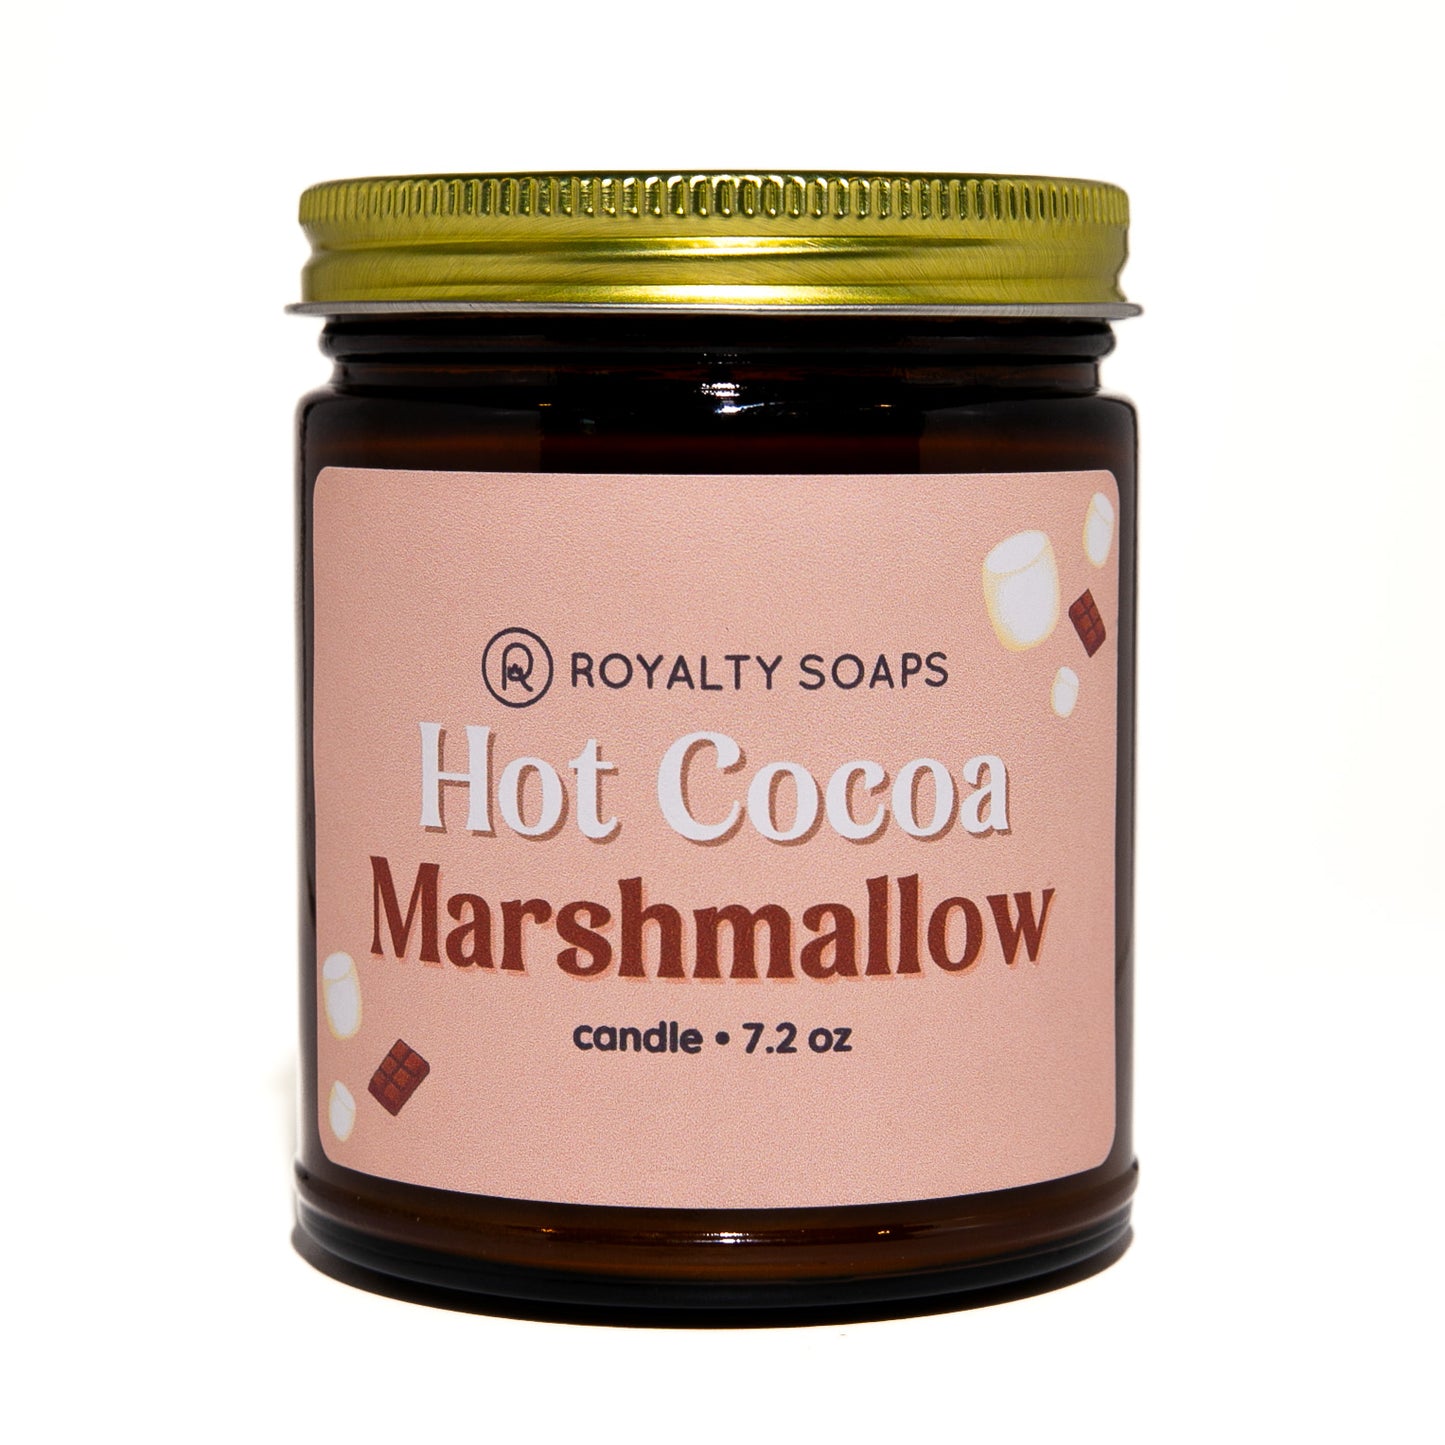 Hot Cocoa Marshmallow Soy Candle